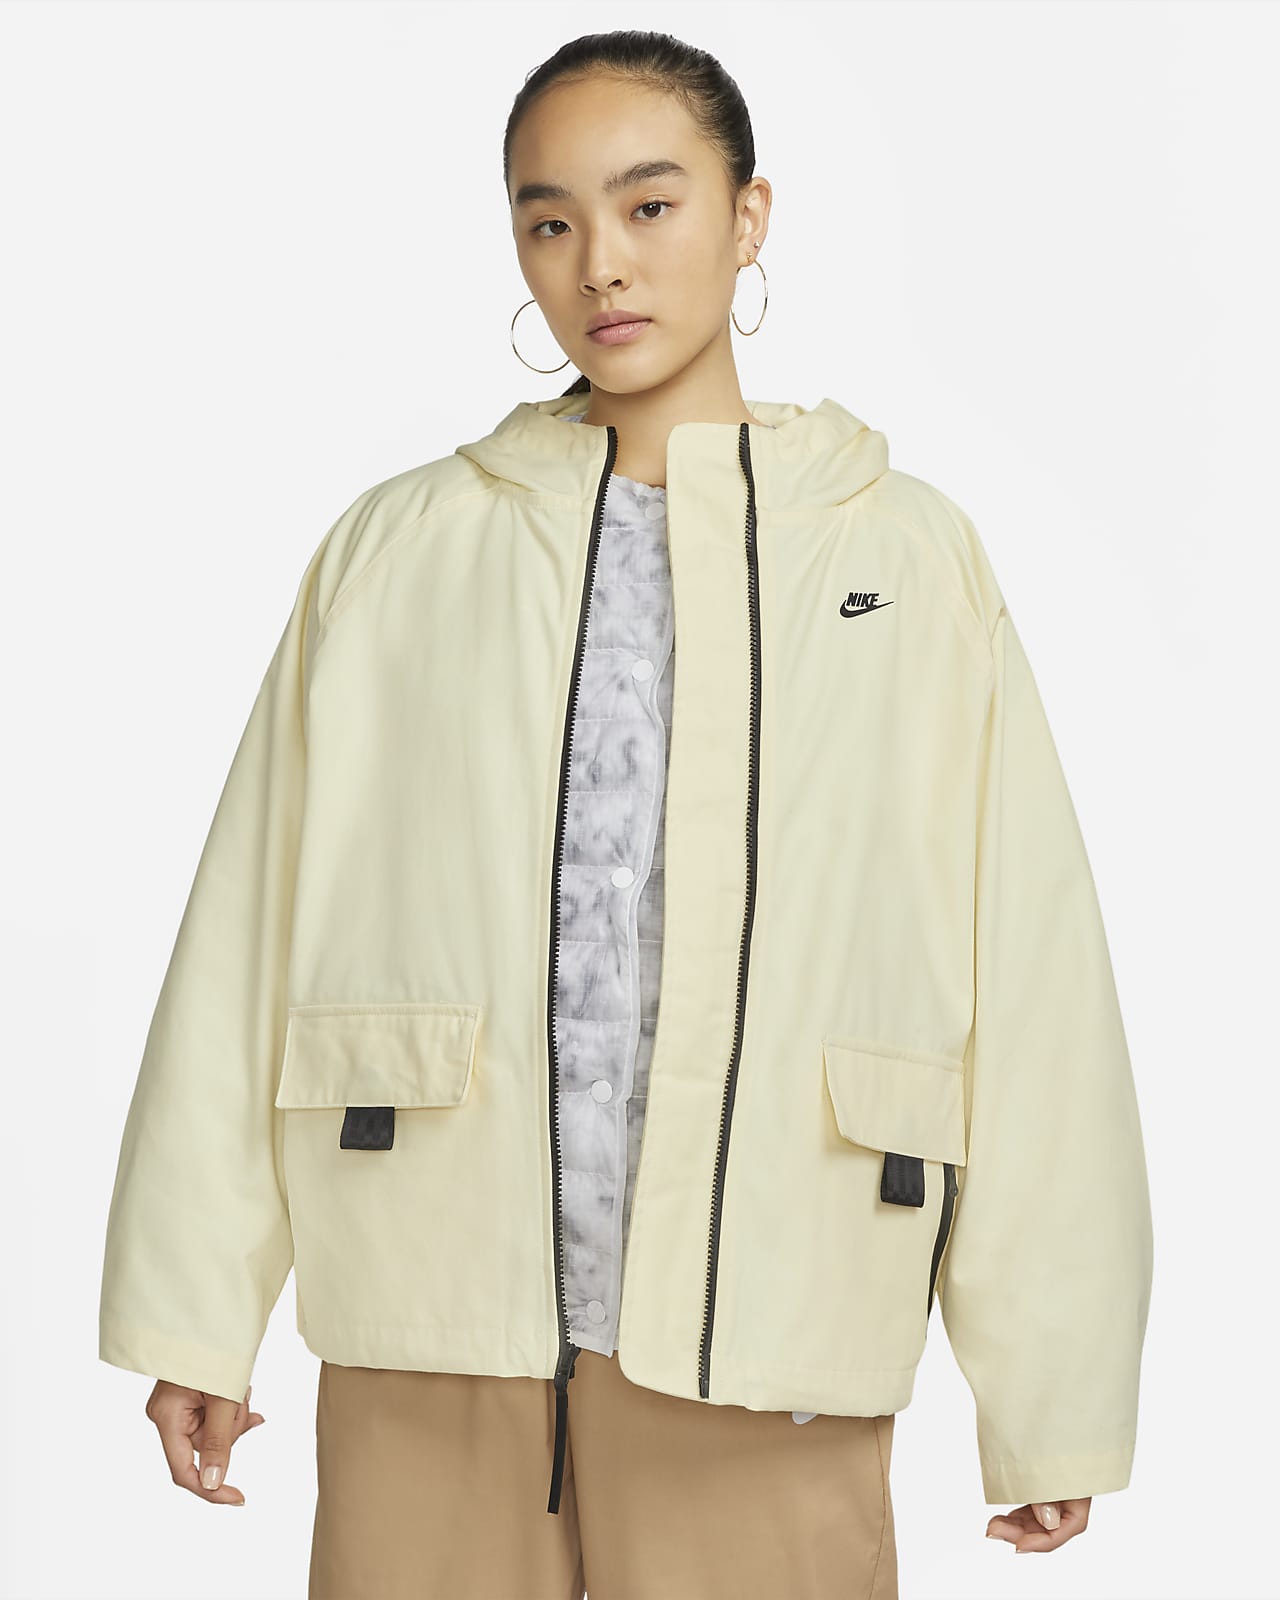 00's nike clima technical fit jacket テック